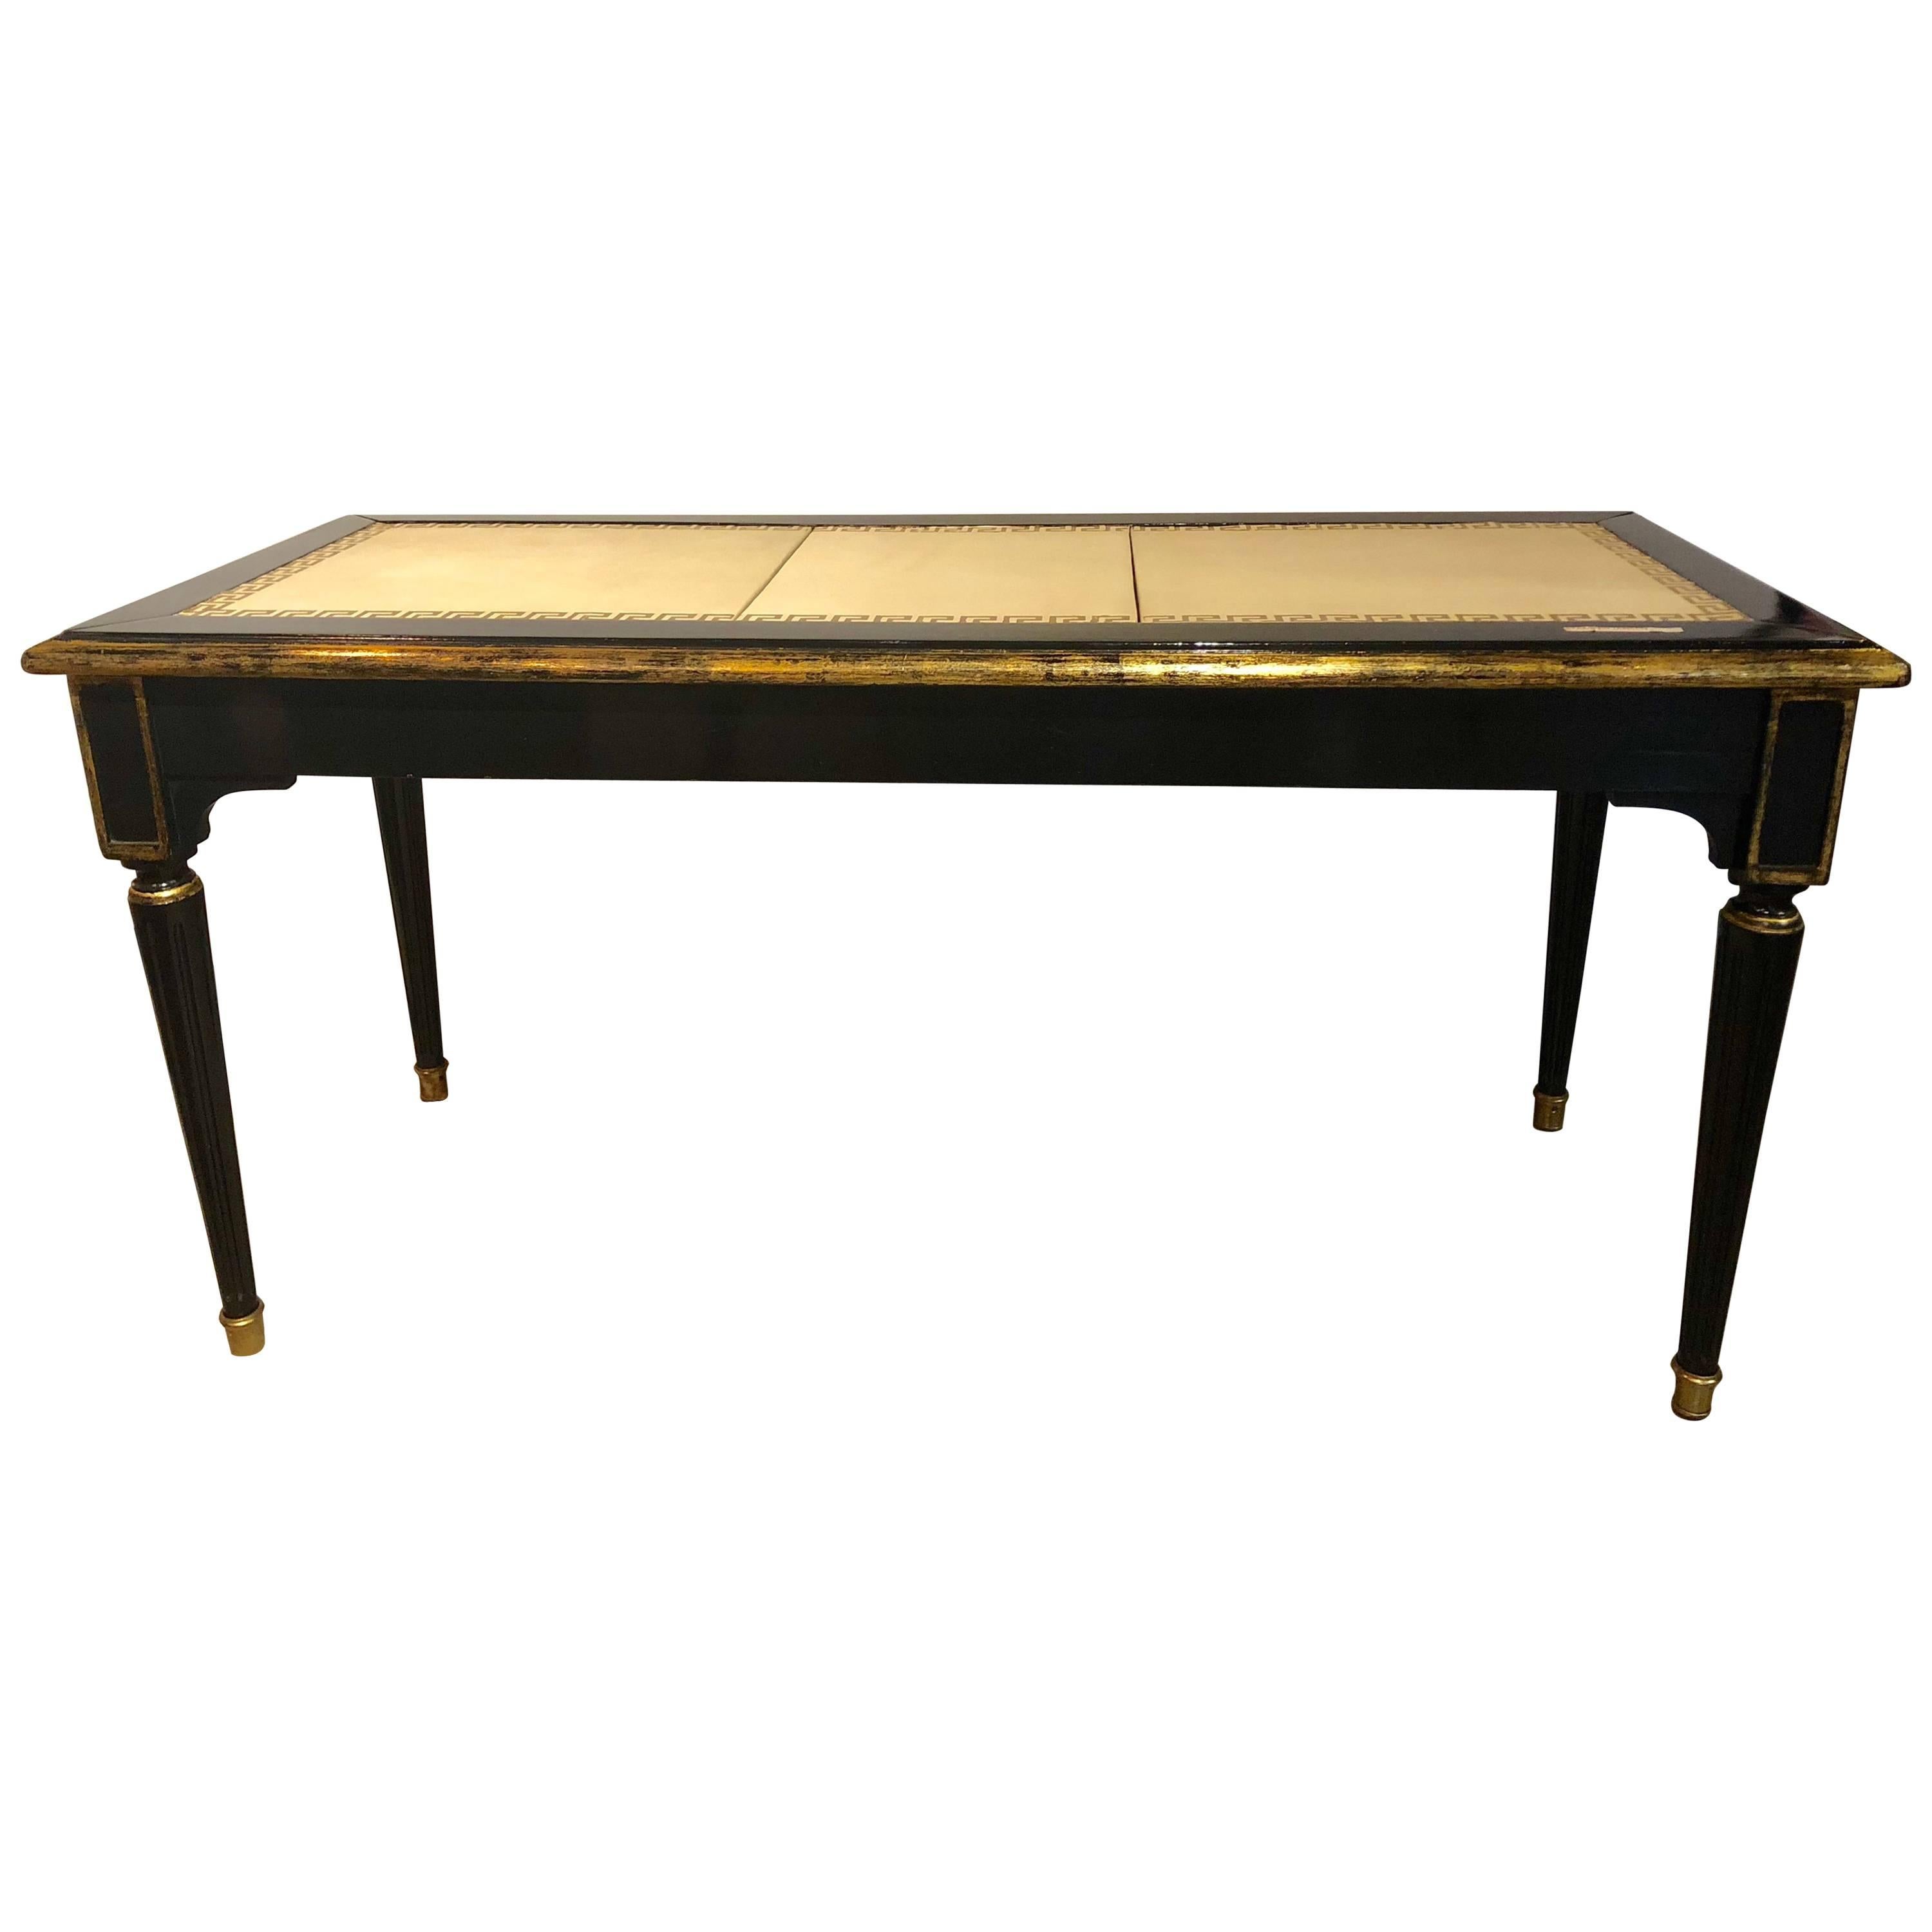 Ebonized Jansen Style Coffee Table with a Greek Key Design and Leather Top